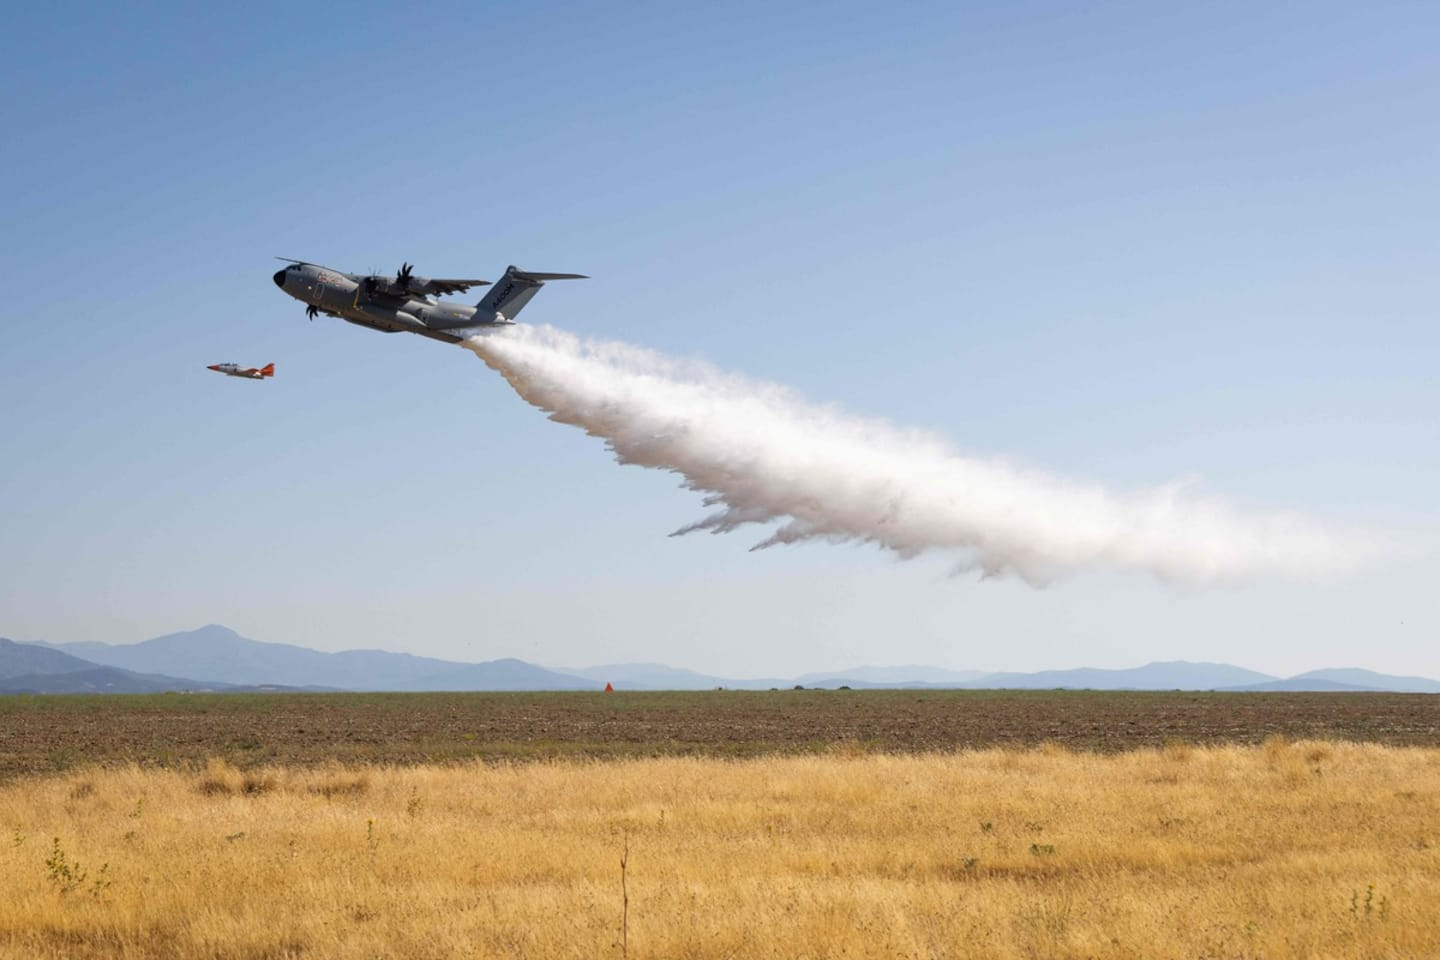 Airbus tested its A400M transport plane as a water bomber